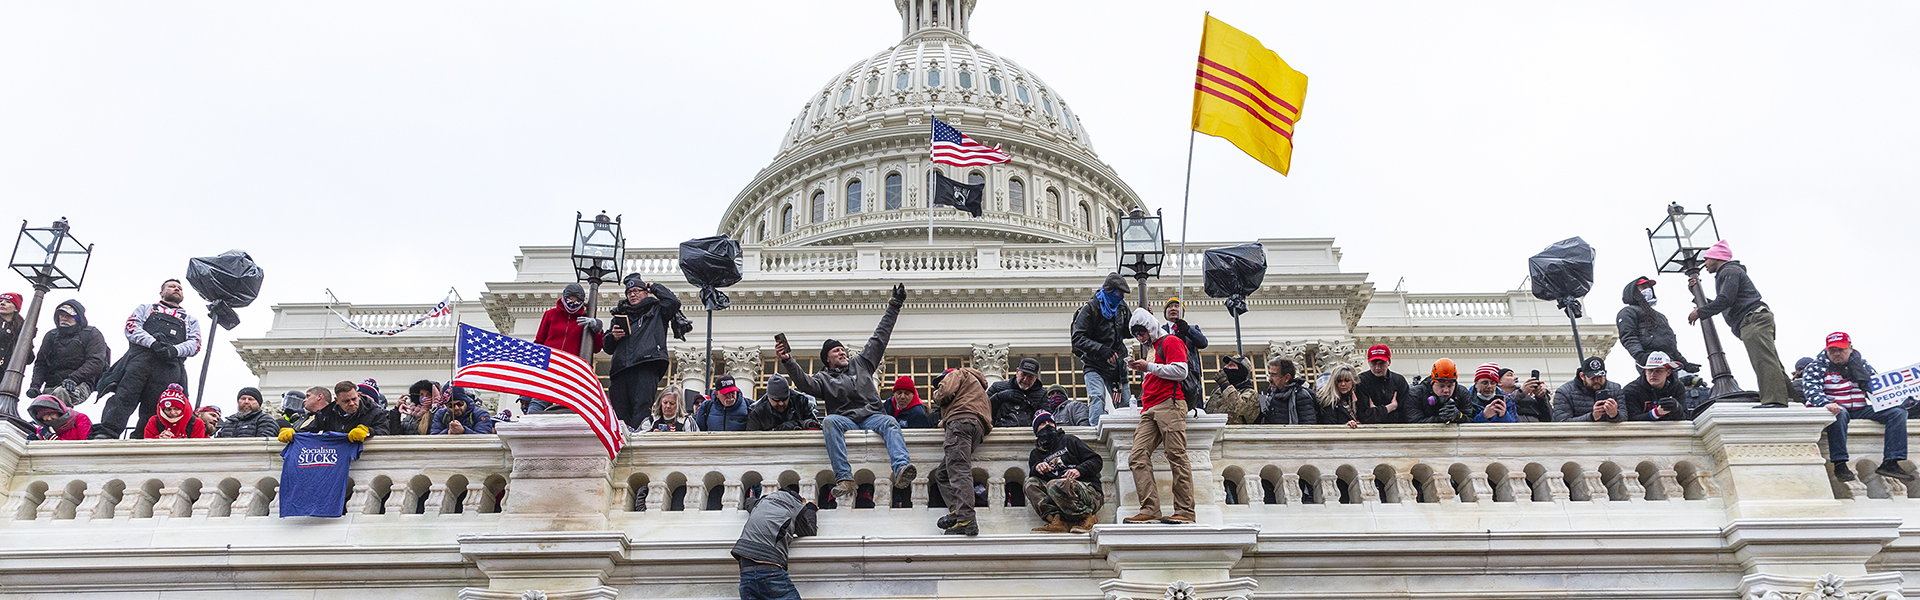 Trump supporters storming the U.S. Capitol on Jan. 6, 2021